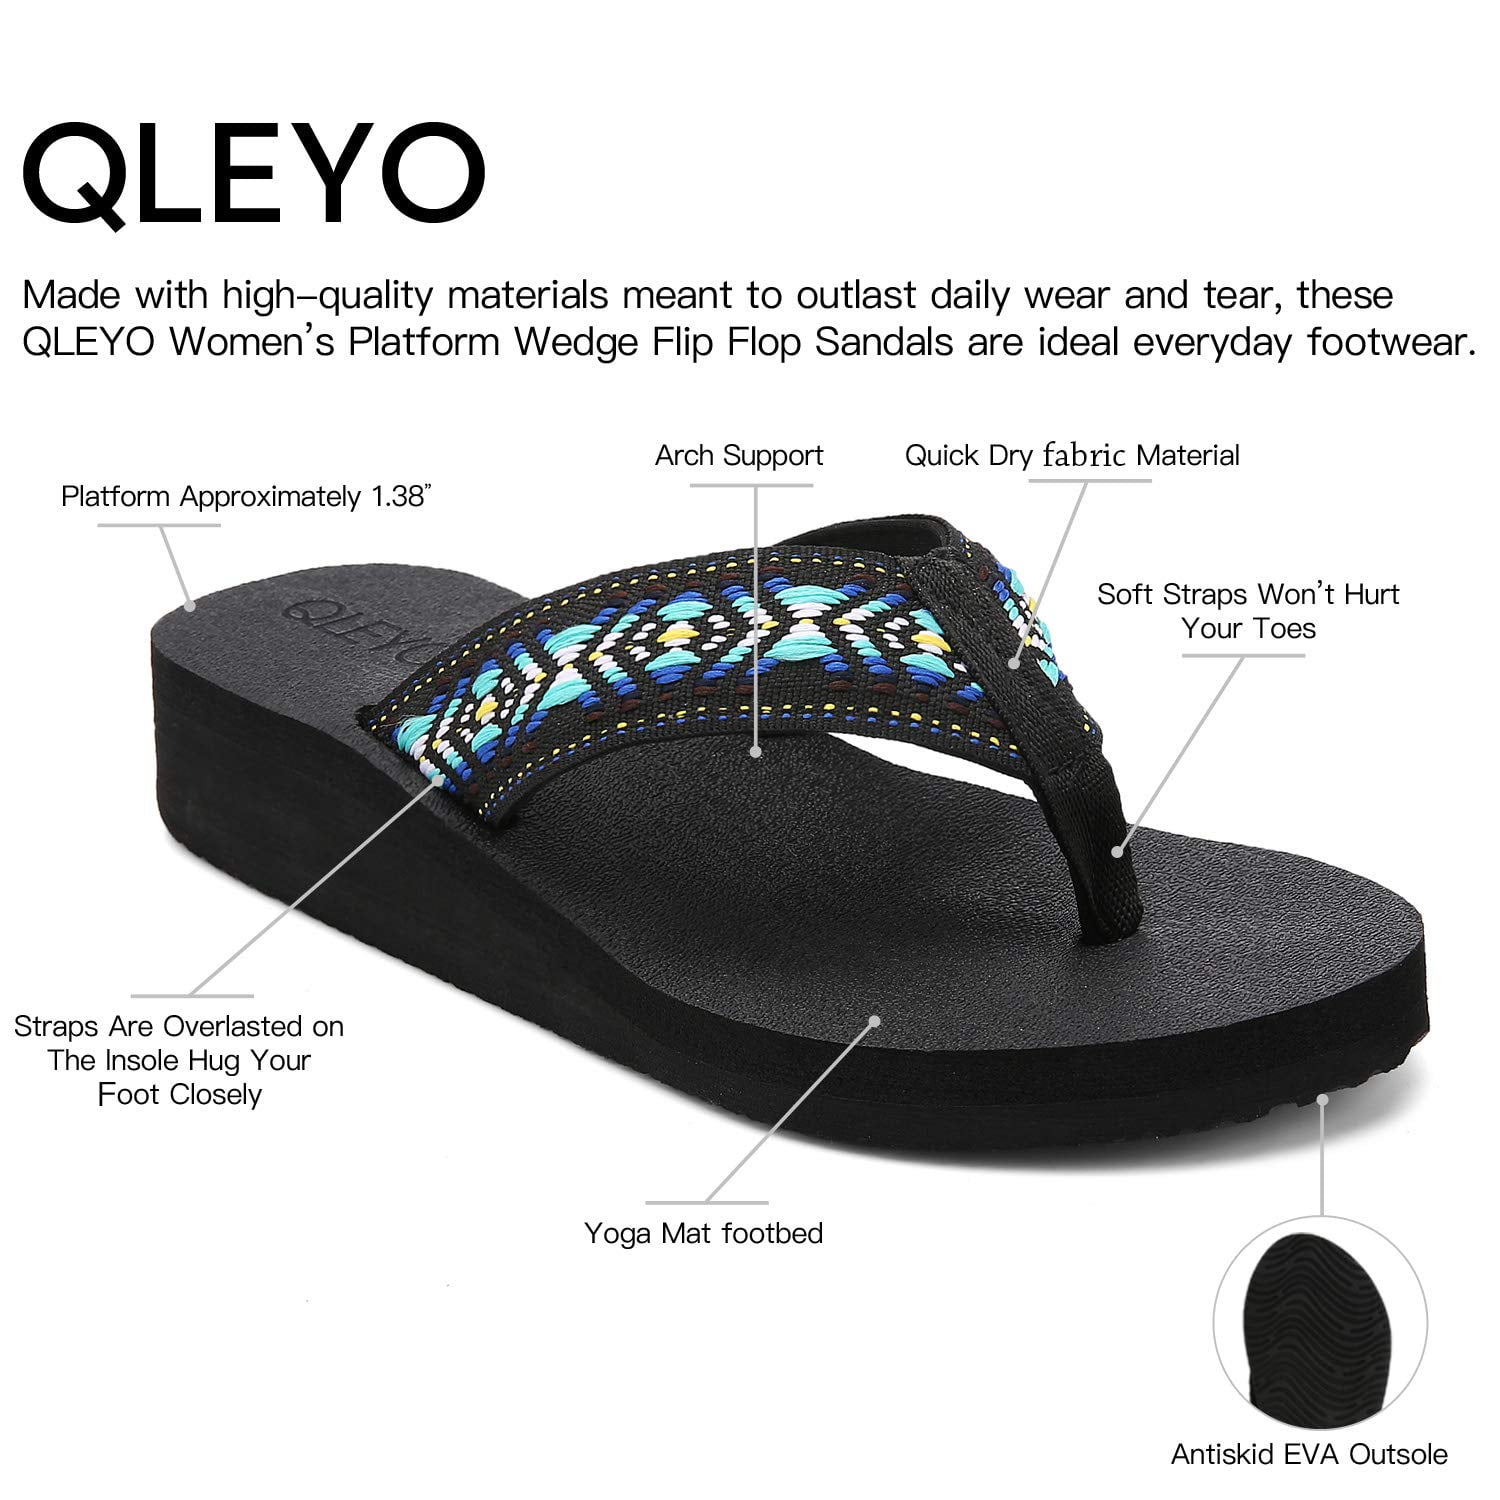  QLEYO Women's Memory Foam Wedge Sandals with Straps for  Walking and Comfort - Perfect for Beach and Outdoor Activities Black Size 5